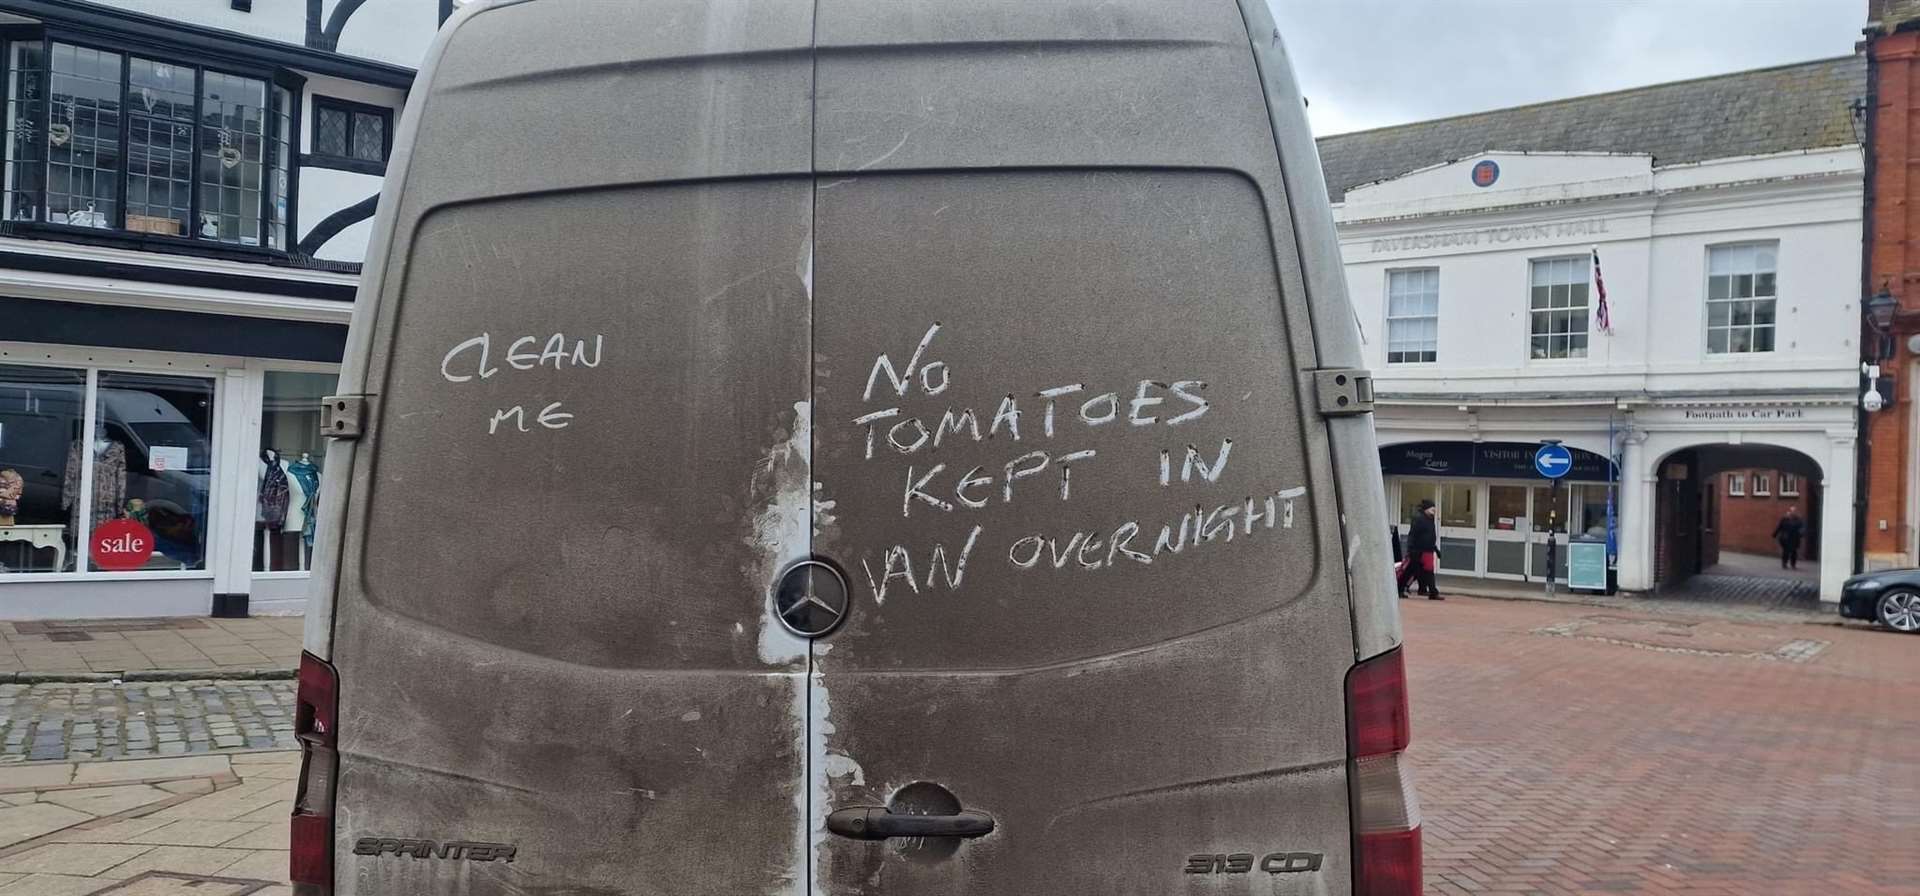 Dirty van in Faversham suggests there is shortage of tomatoes. Picture: Andy Capon